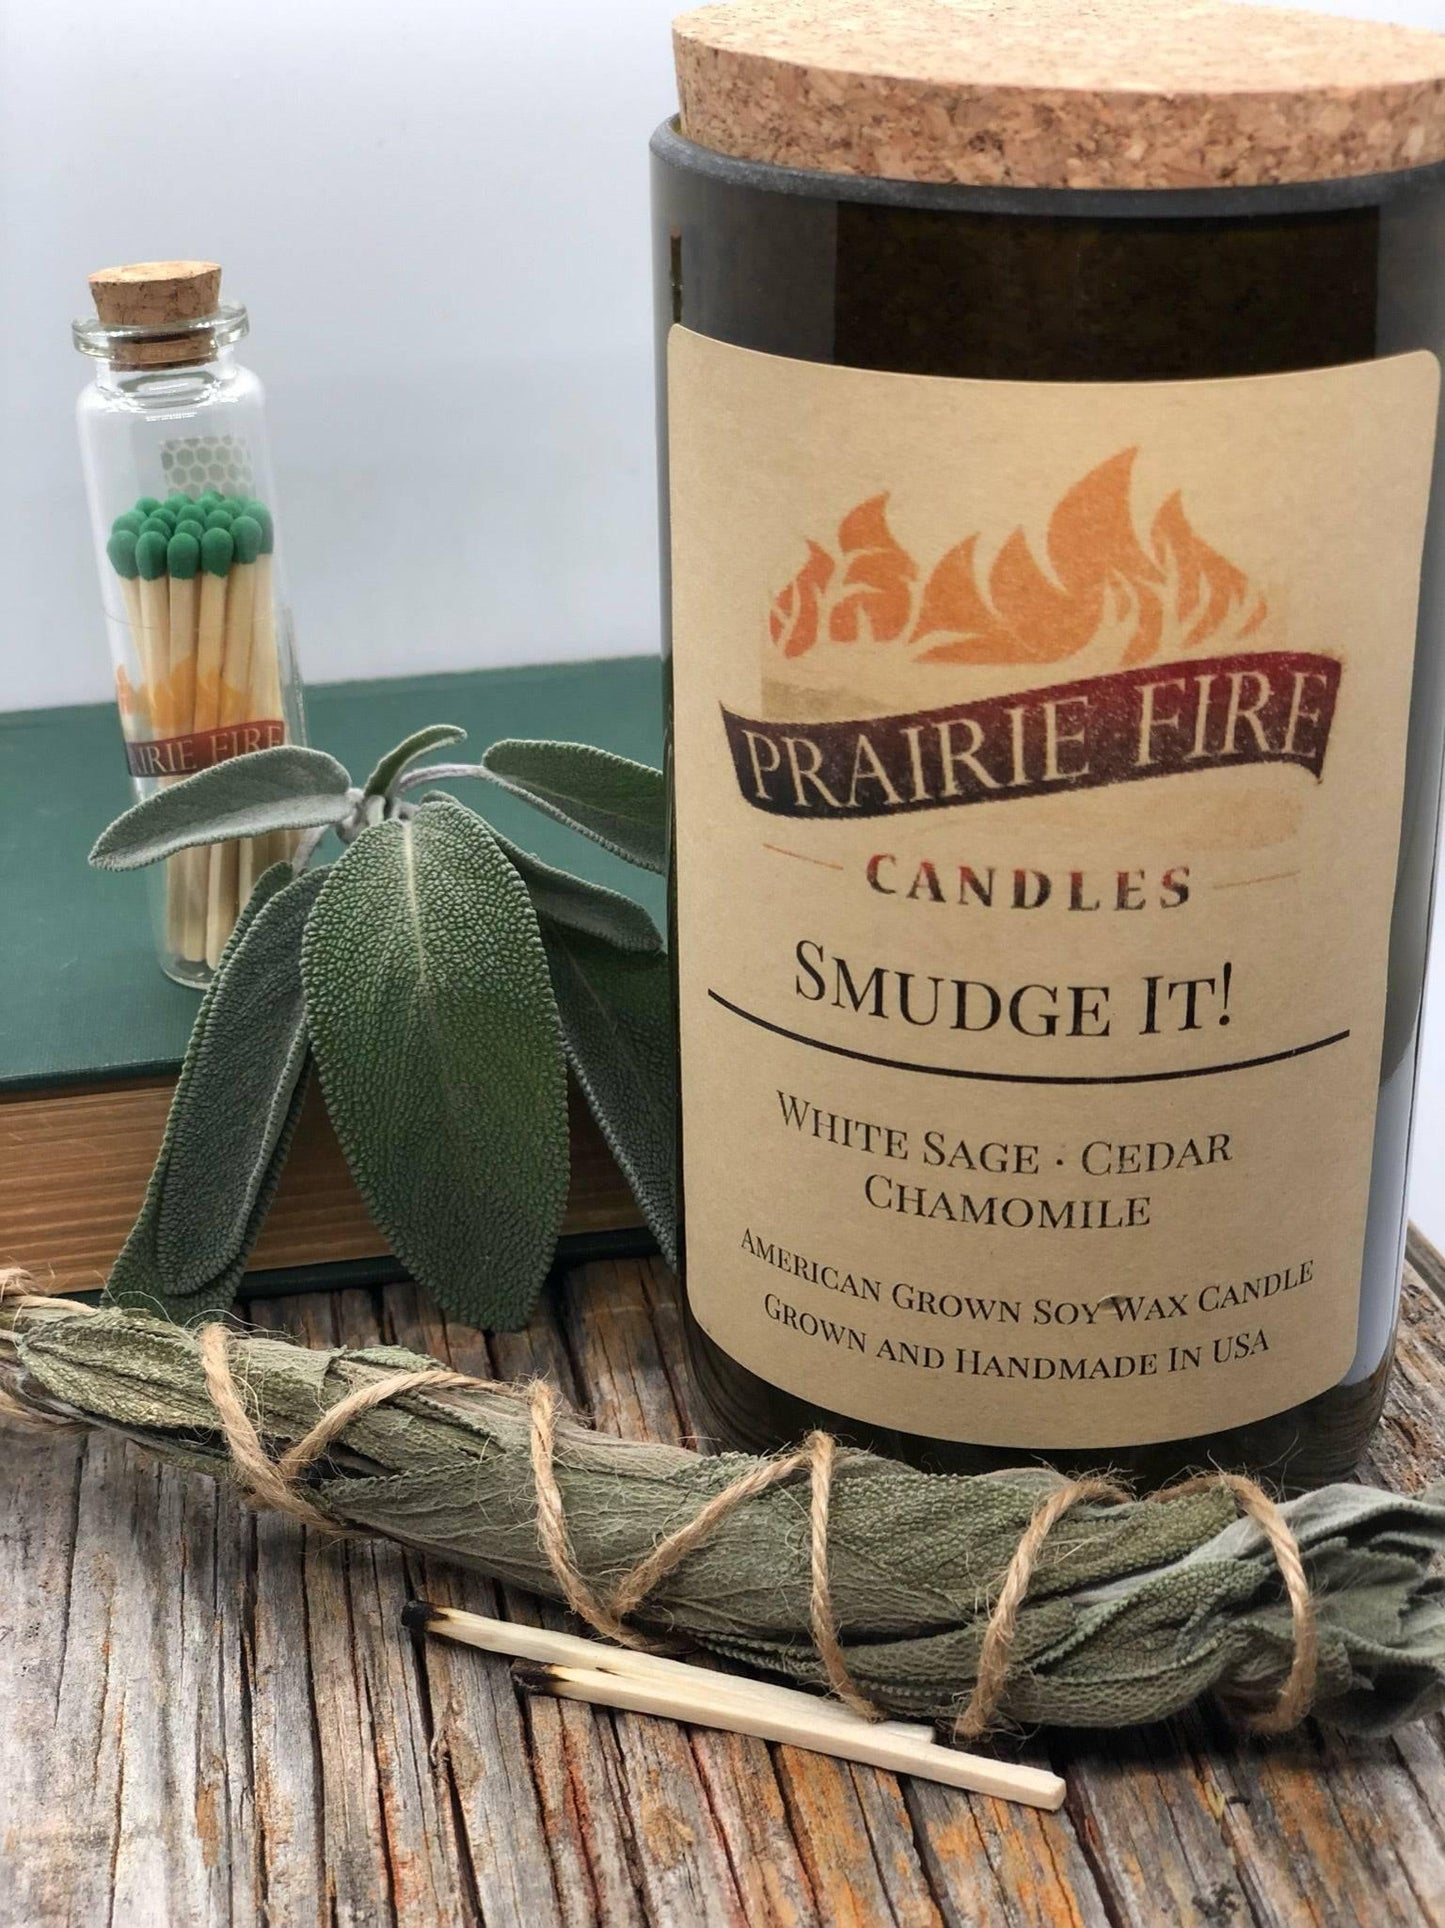 Oregon Trail Soy Wax Candle | Repurposed Wine Bottle Candle Natural Cork | Handmade in USA Candle | Eco-Friendly Candle | Non-Toxic Soy Candle - Prairie Fire Candles